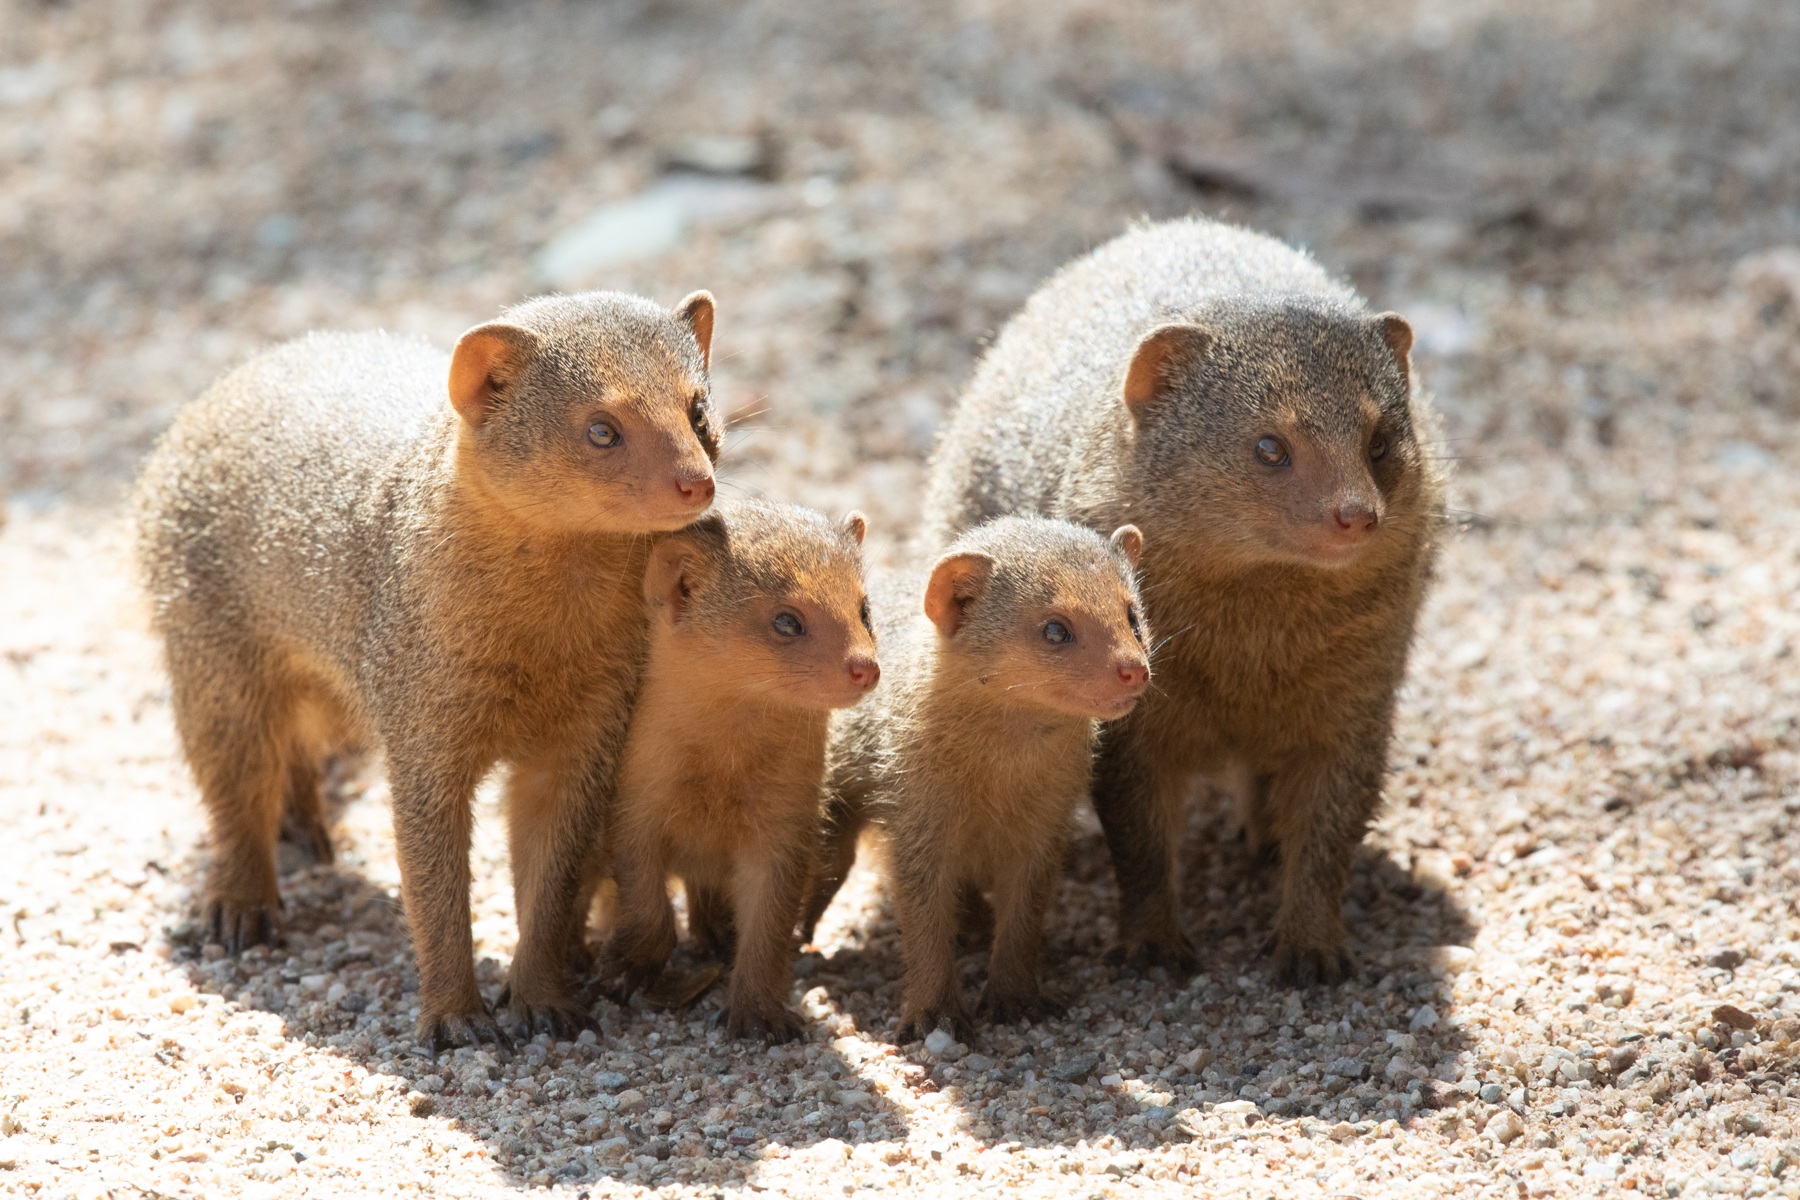 A family of Dwarf Mongoose in the Serengeti